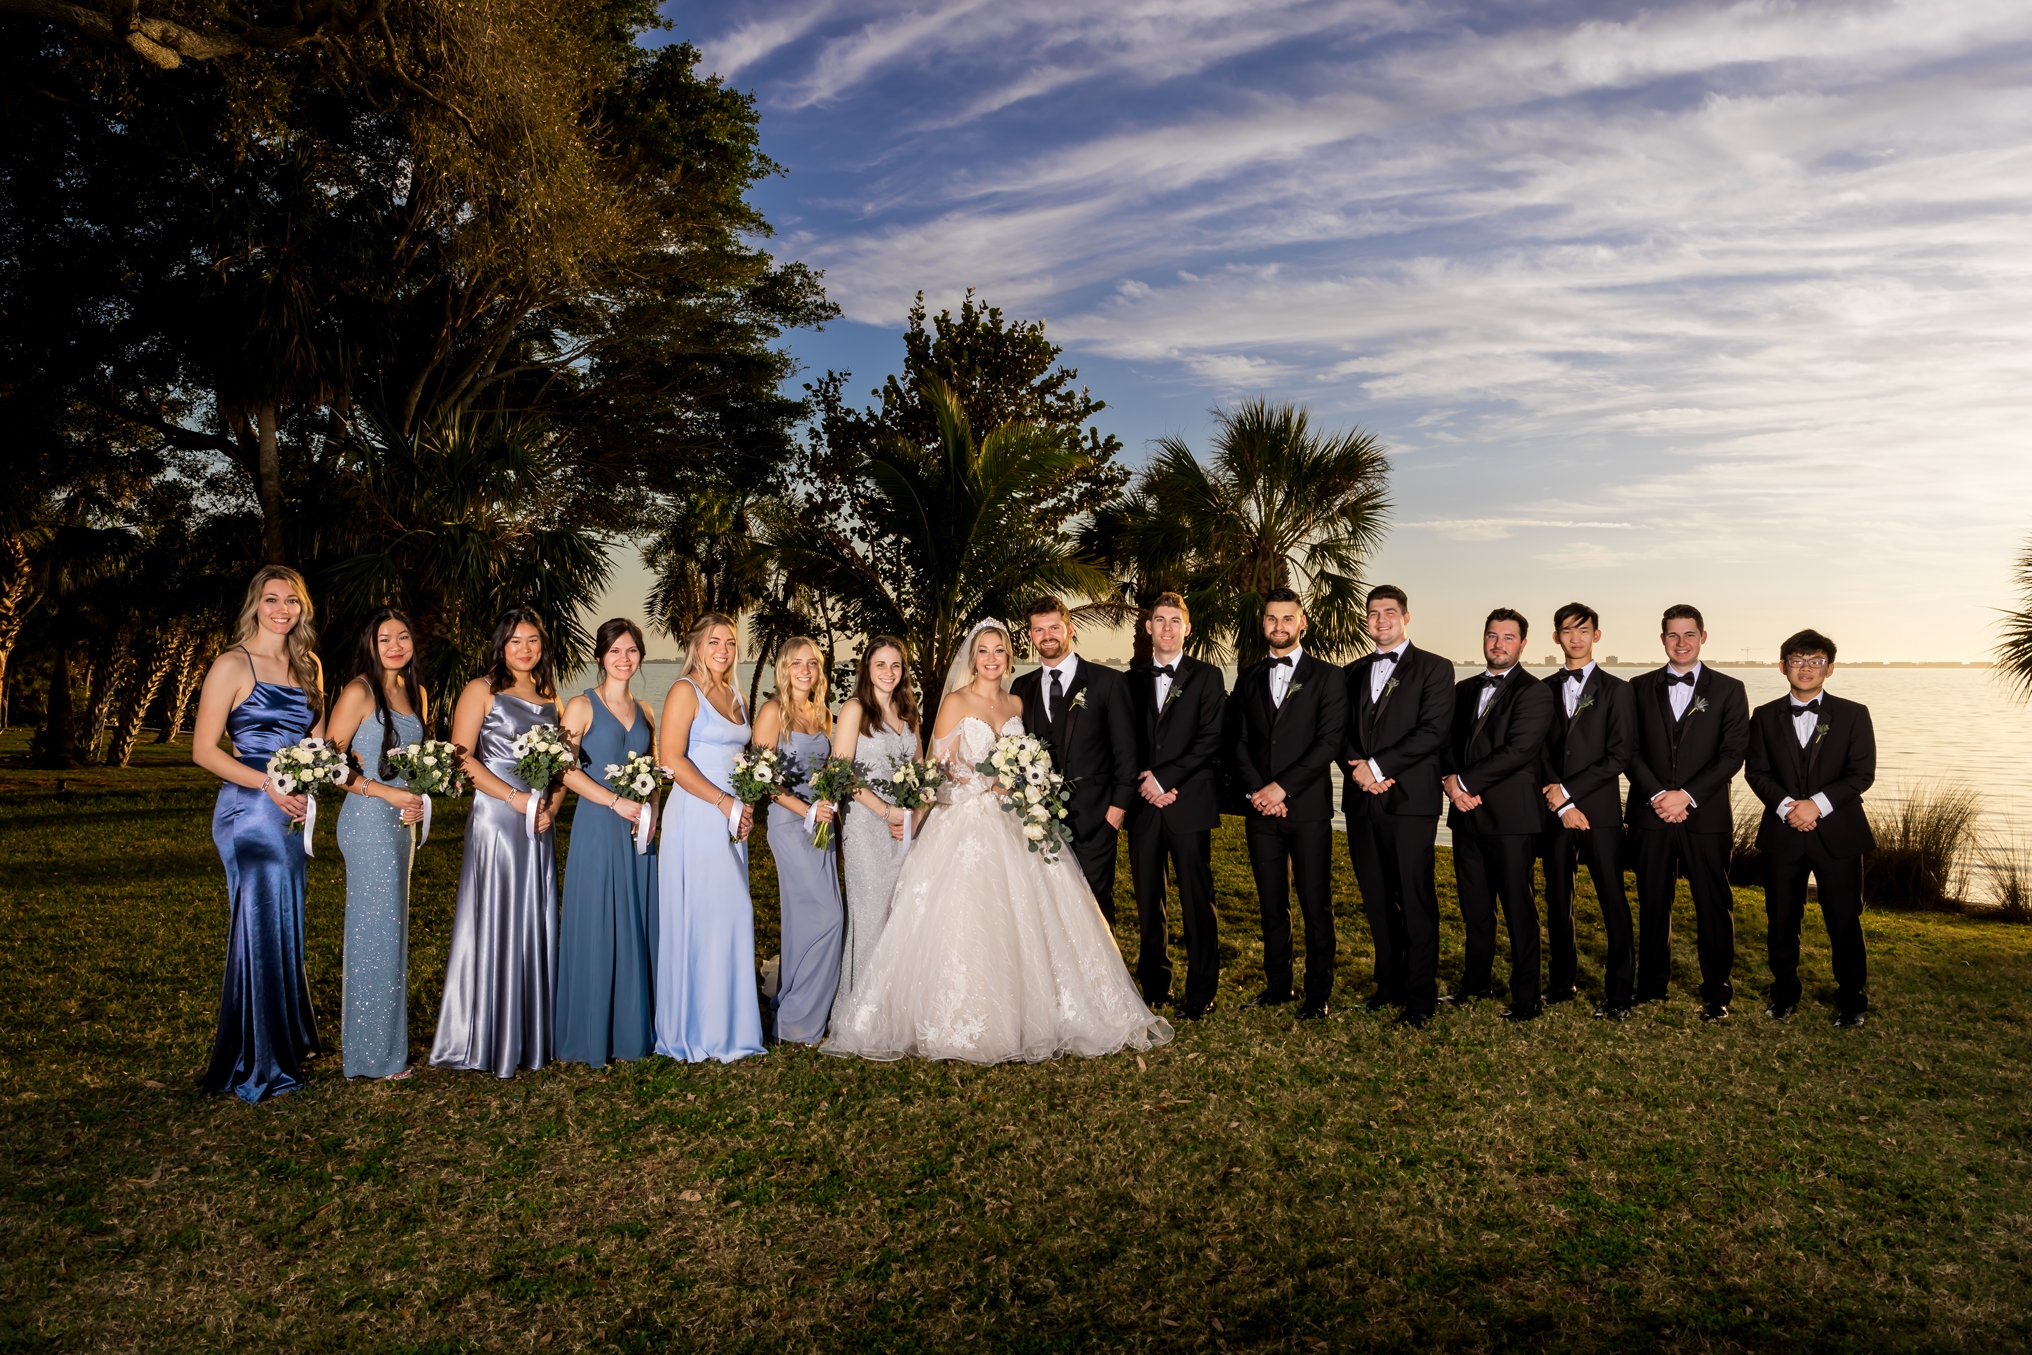 Wide angle wedding party photo taken by Love and Style Photography at the Powel Crosley Estate.